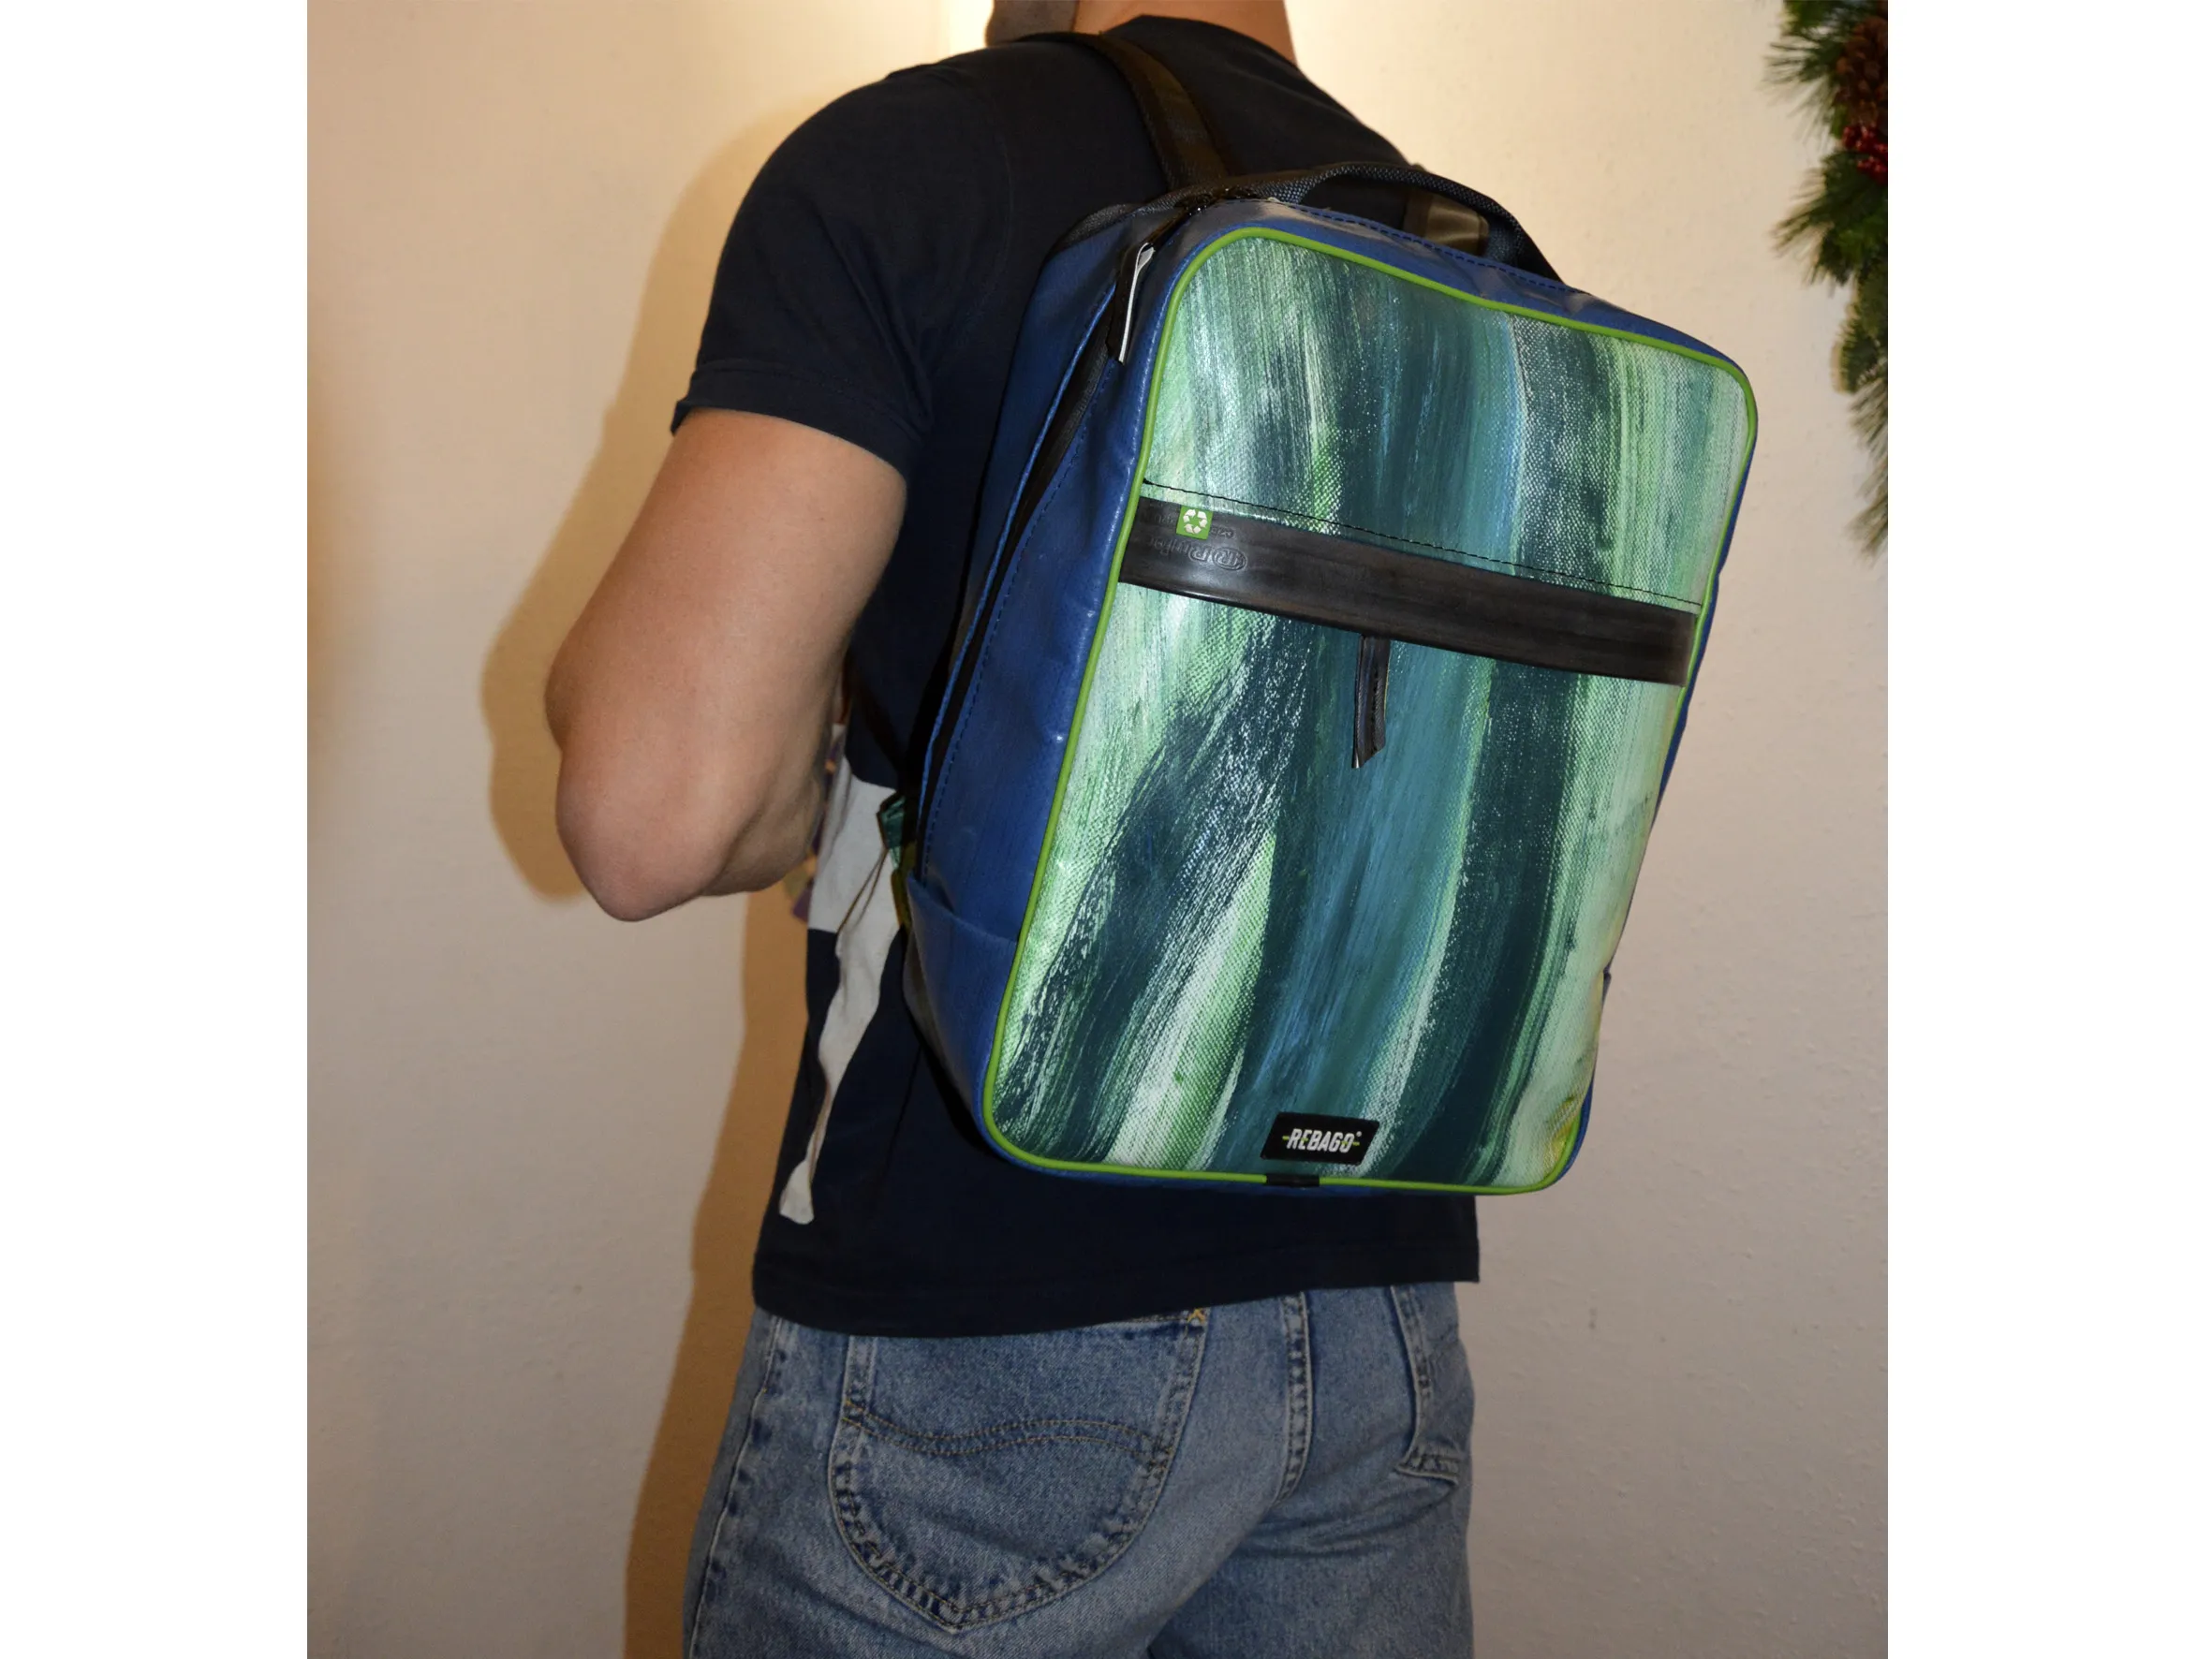 BOB-upcycled-backpack-one-of-a-kind-recycled-upcycling-bags-1-Rebago